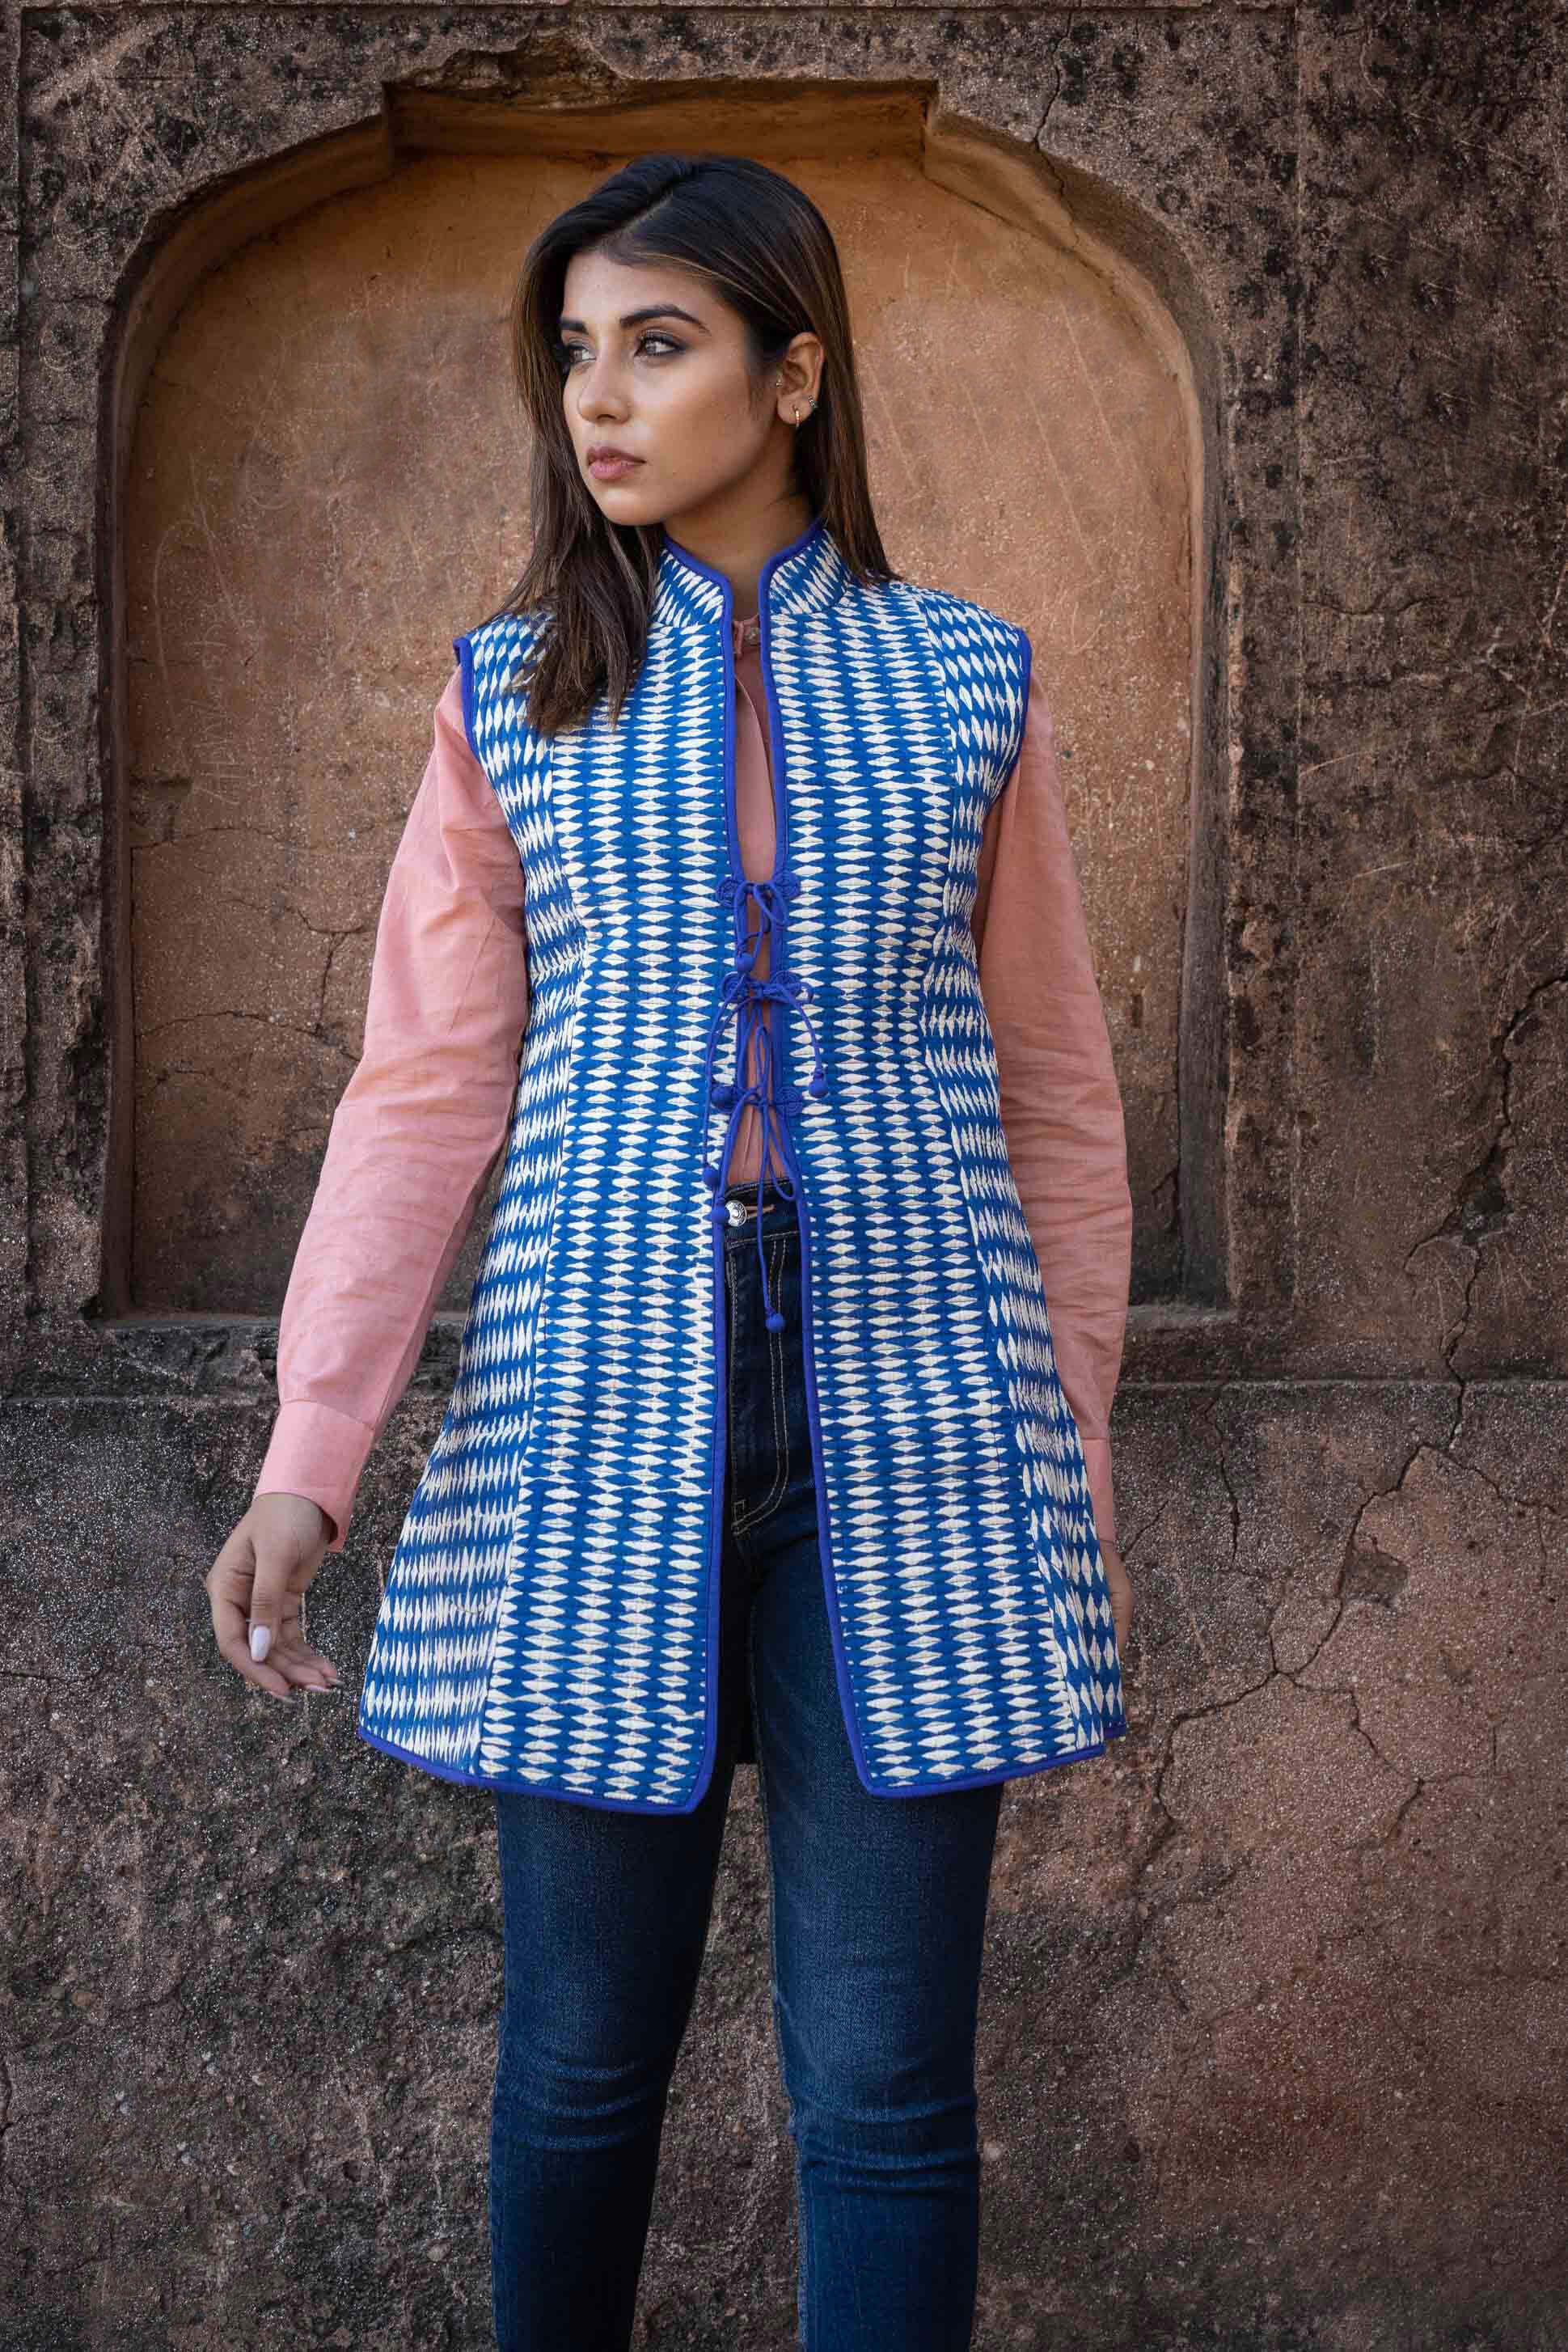 Blue Reversible Quilted Sleeveless Jacket